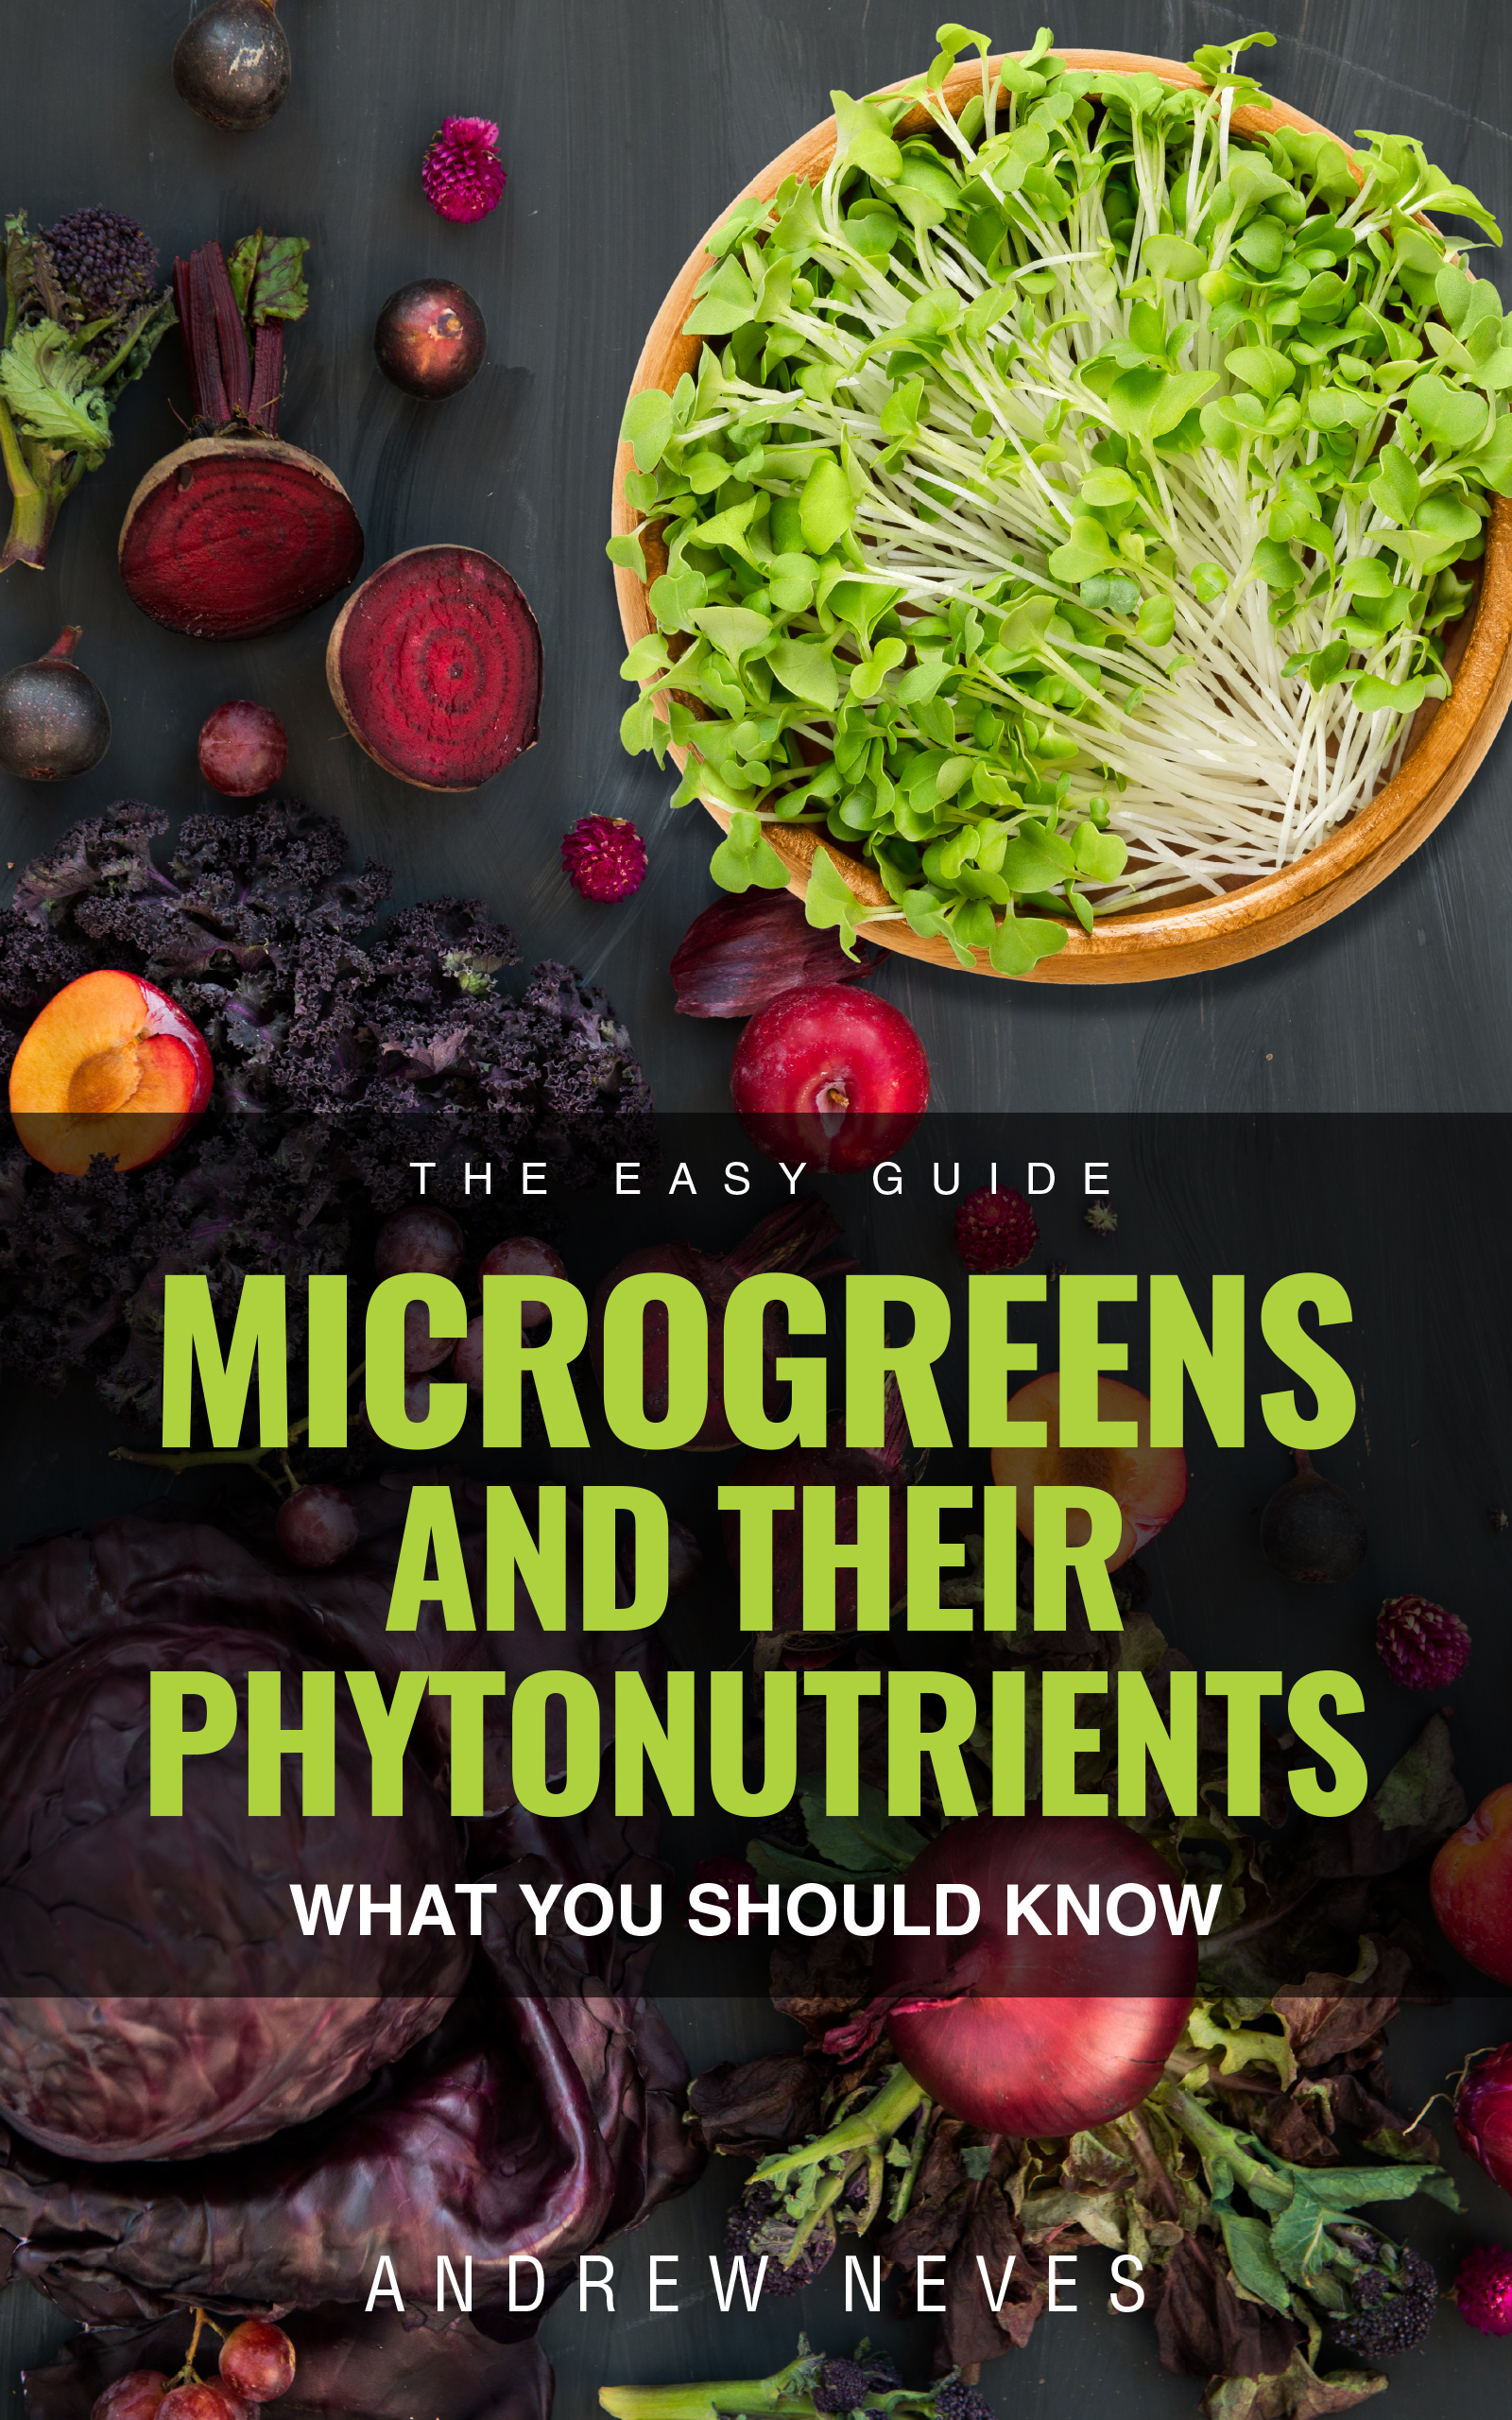 Microgreens and their Phytochemicals